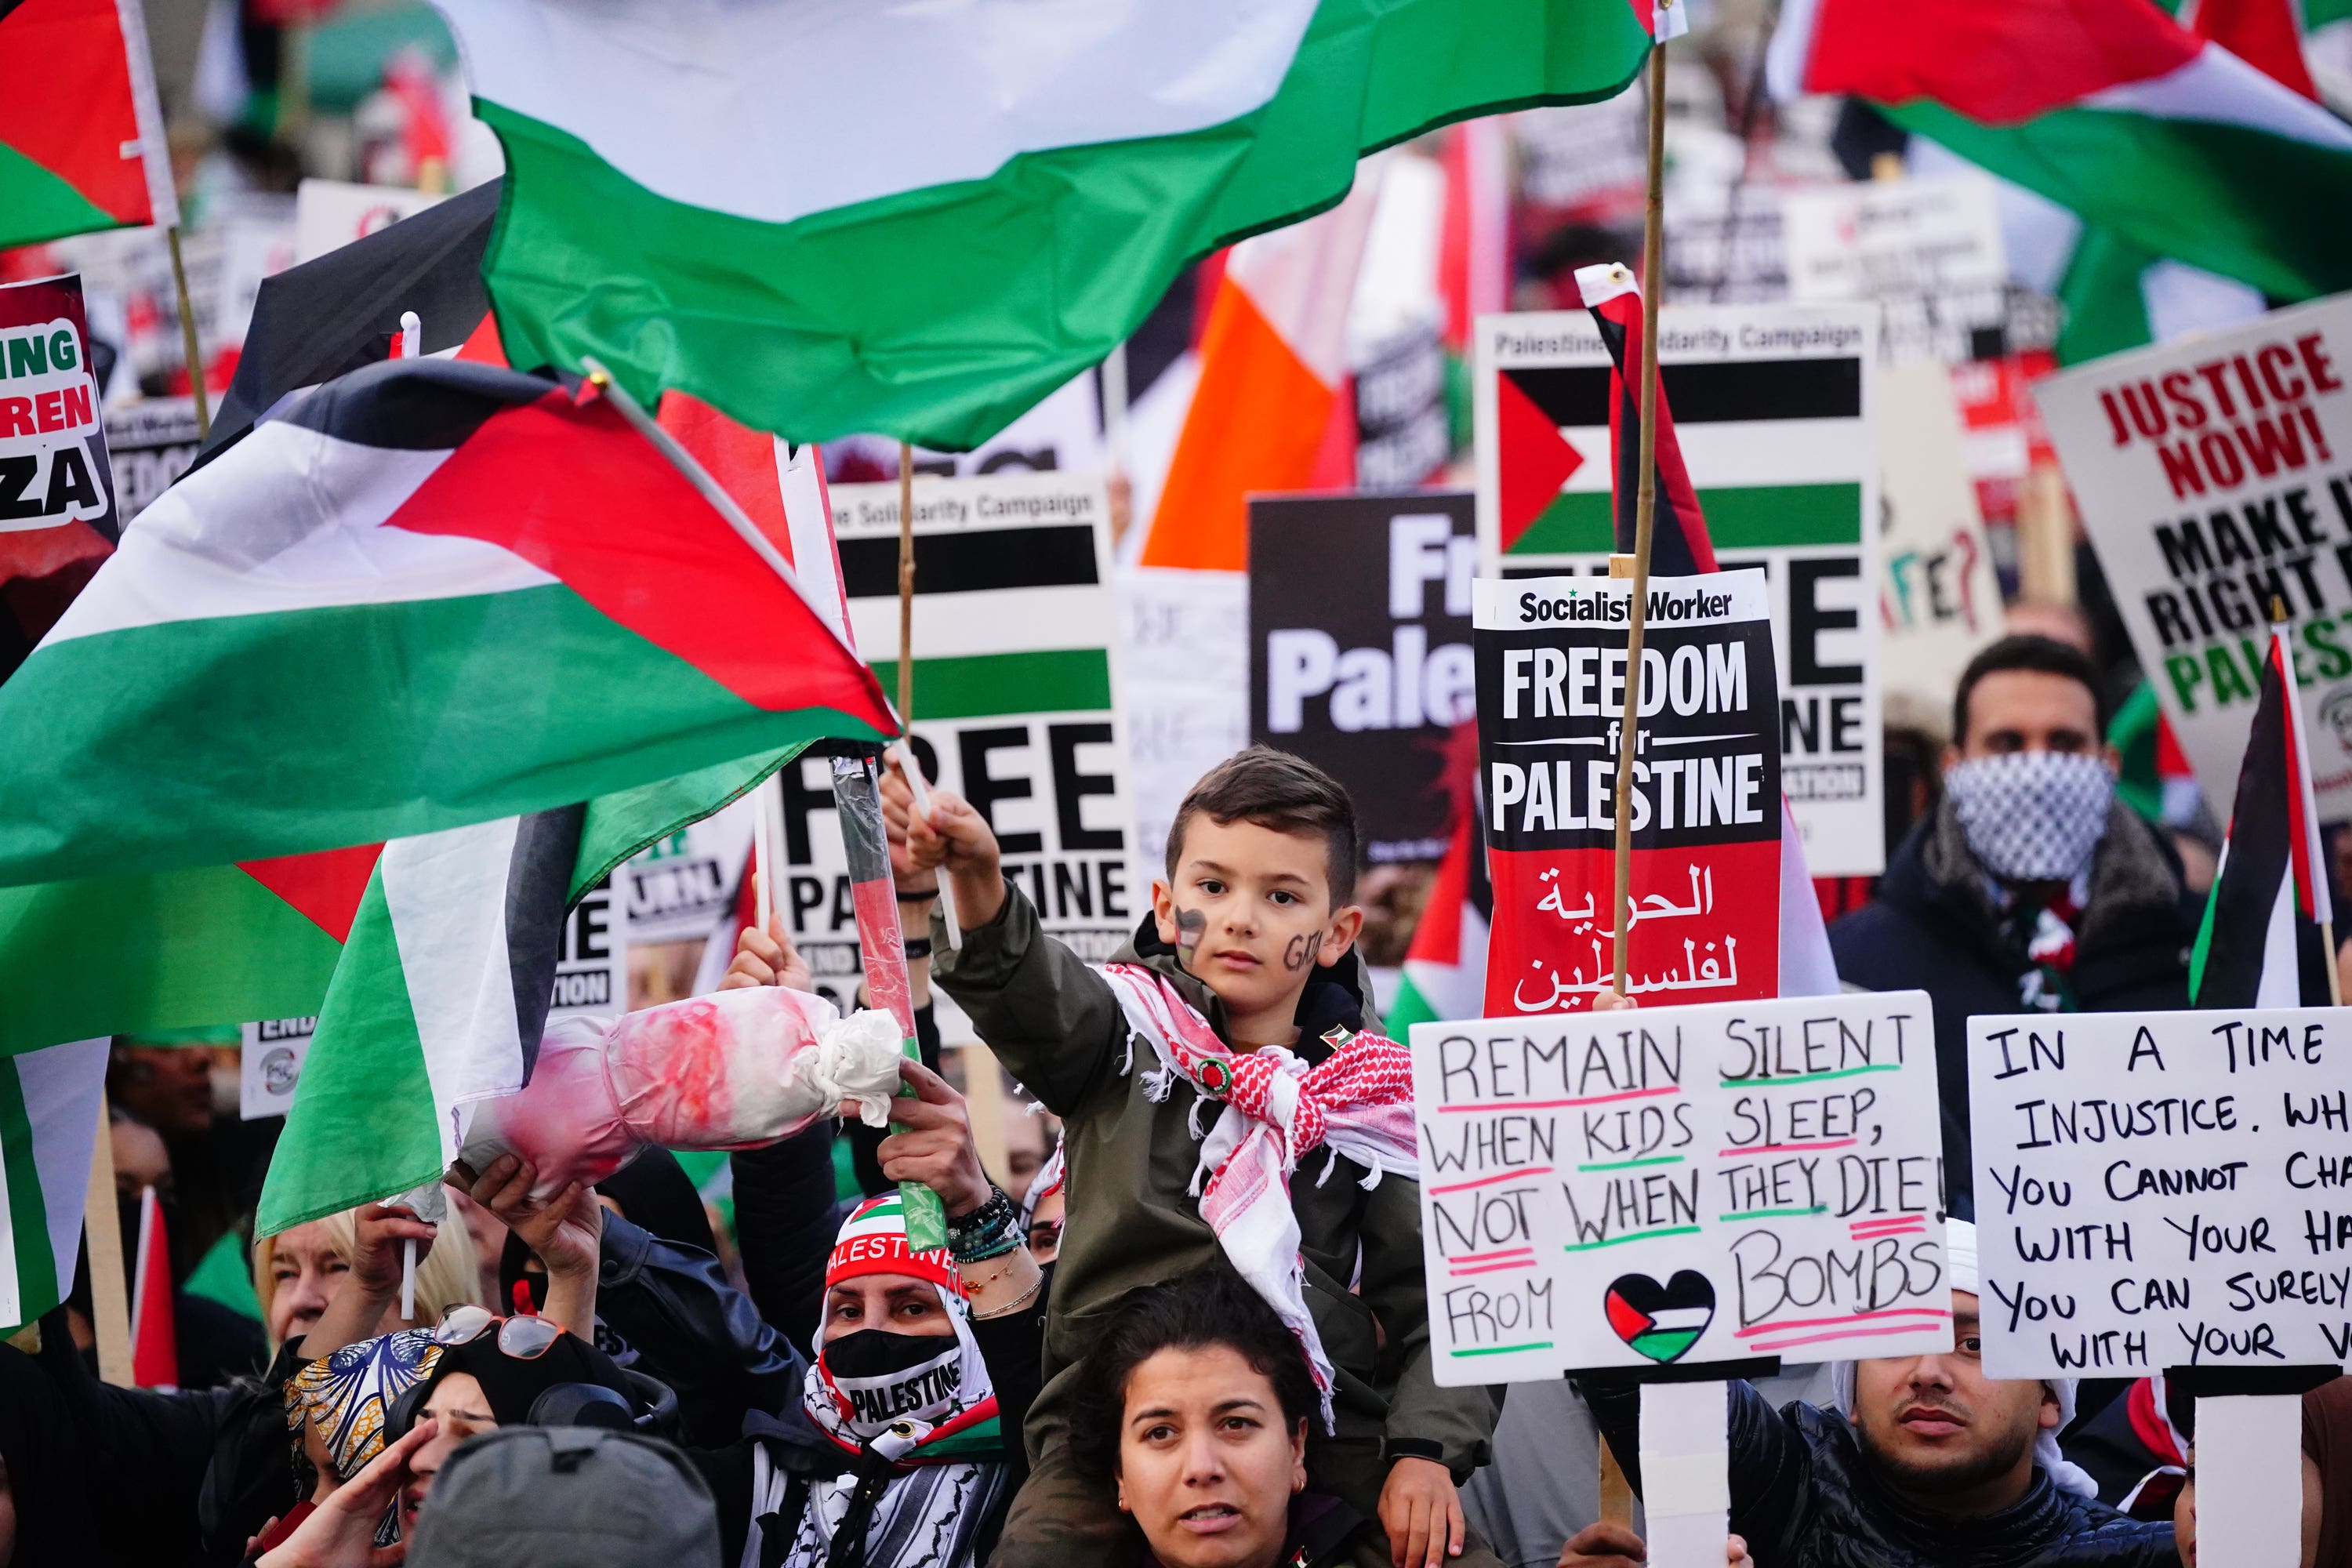 People at a rally in Trafalgar Square, London, during Stop the War coalition’s call for a Palestine ceasefire.